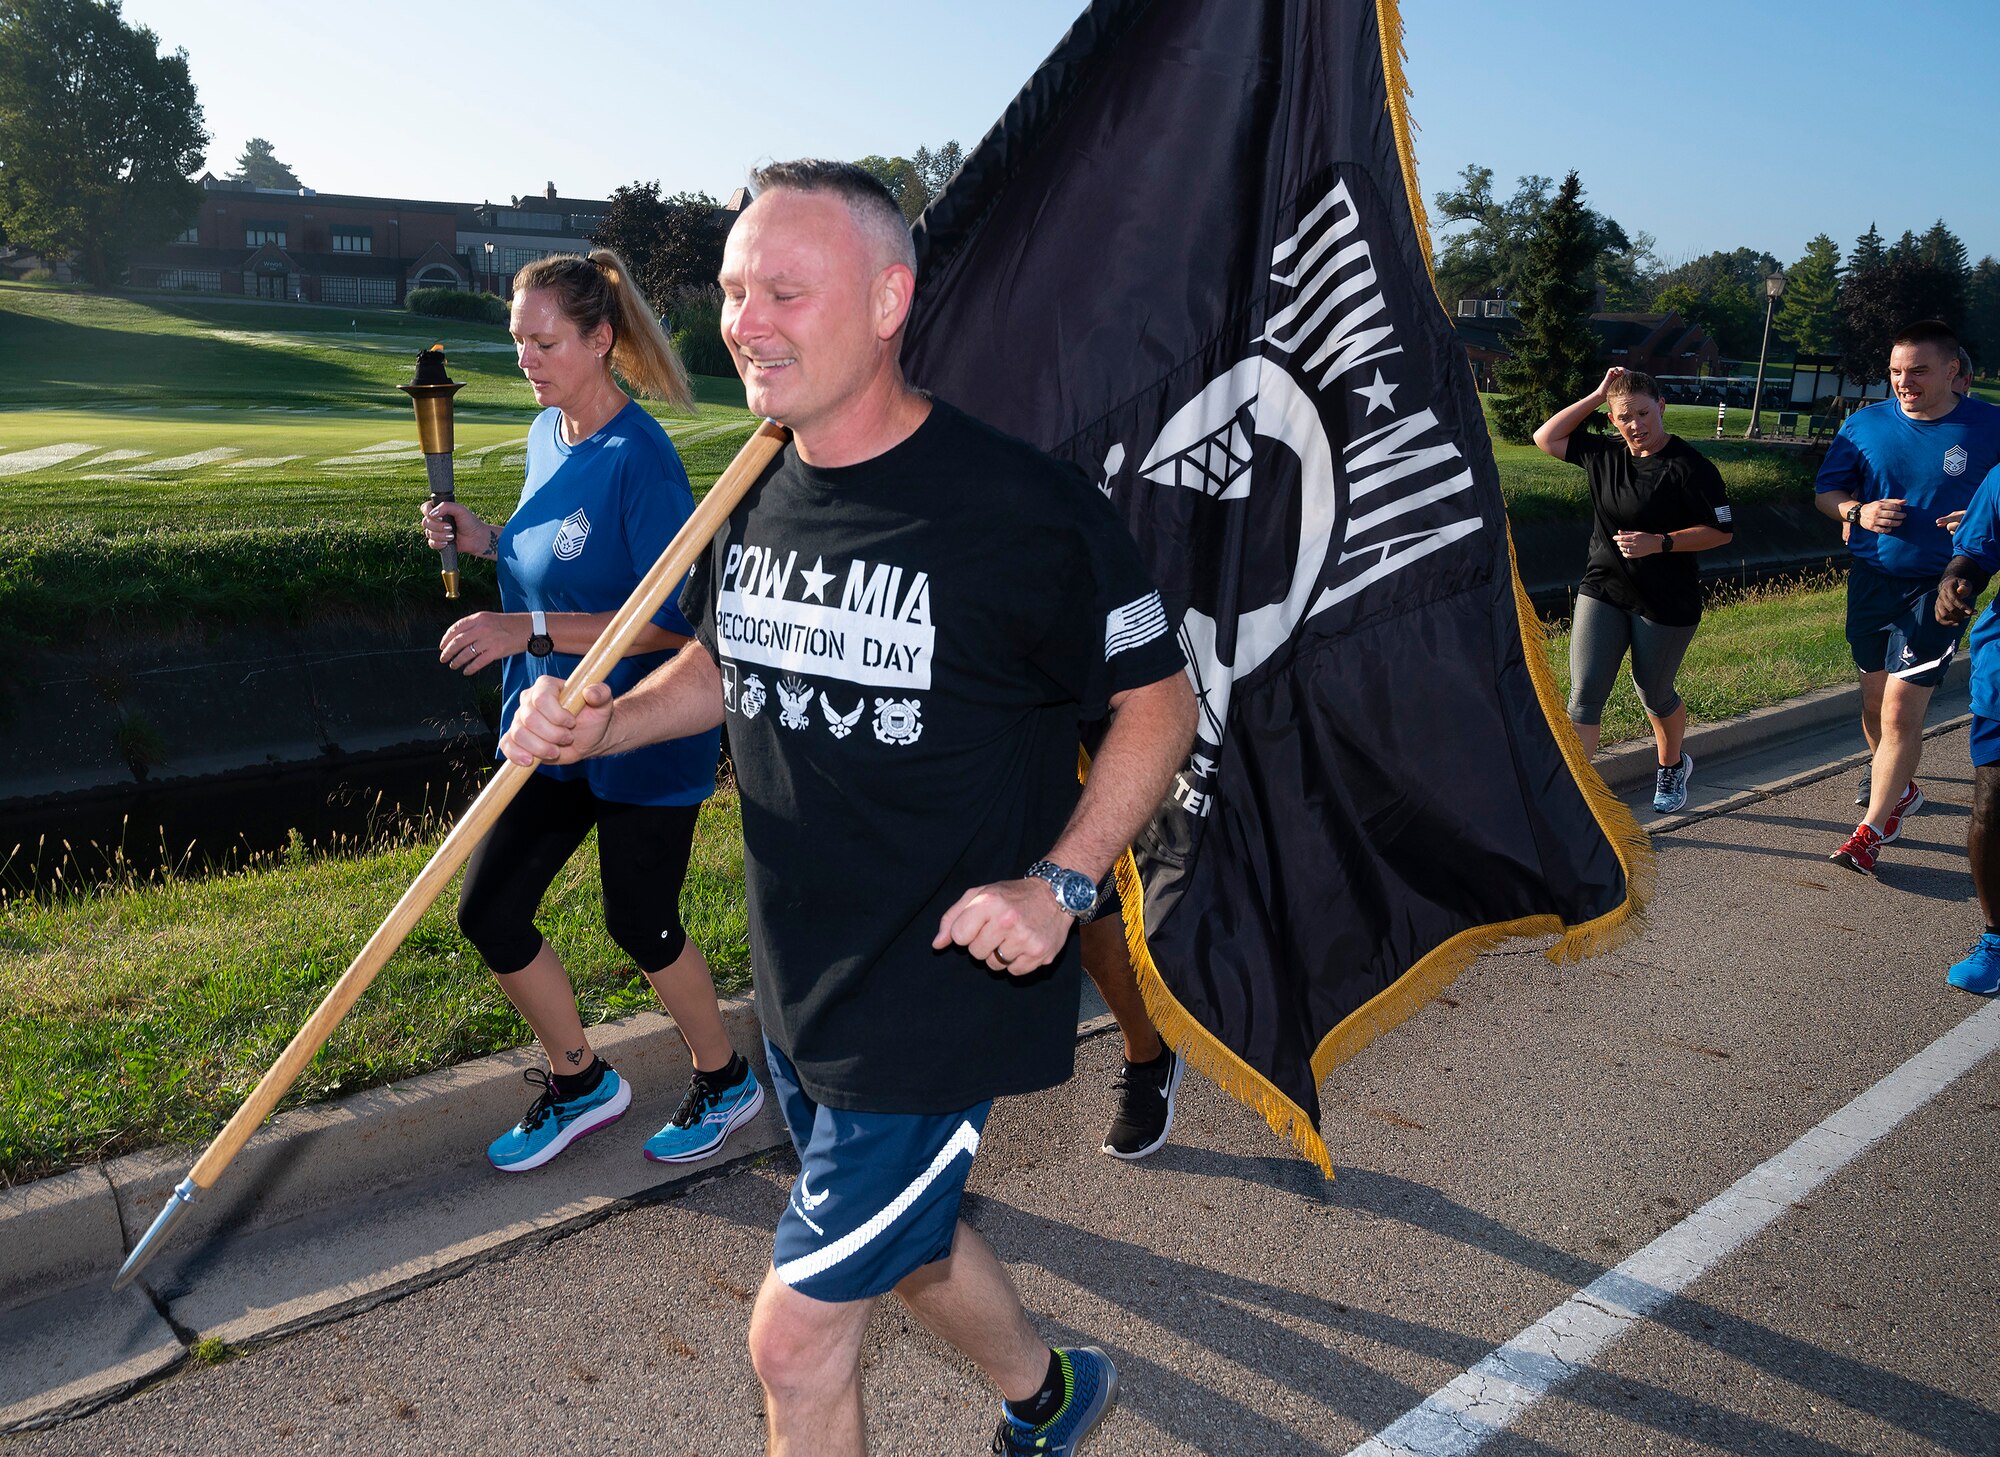 Chief Master Sgt. Shawn Plowman, 88th Diagnostics and Therapeutics Squadron, carries the POW/MIA Flag while Chief Master Sgt. Lindsey Wolf, Air Force Materiel Command command paralegal, holds up the torch as they lead a Wright-Patterson Chiefs Group delegation on the annual POW/MIA run Sept. 17, 2021. Runners delivered the torch and flag to the POW/MIA Recognition Day wreath-laying ceremony at Wright-Patterson Air Force Base, Ohio. National POW/MIA Recognition Day is marked each year on the third Friday in September to remember those held captive or missing in action. (U.S. Air Force photo by R.J. Oriez)